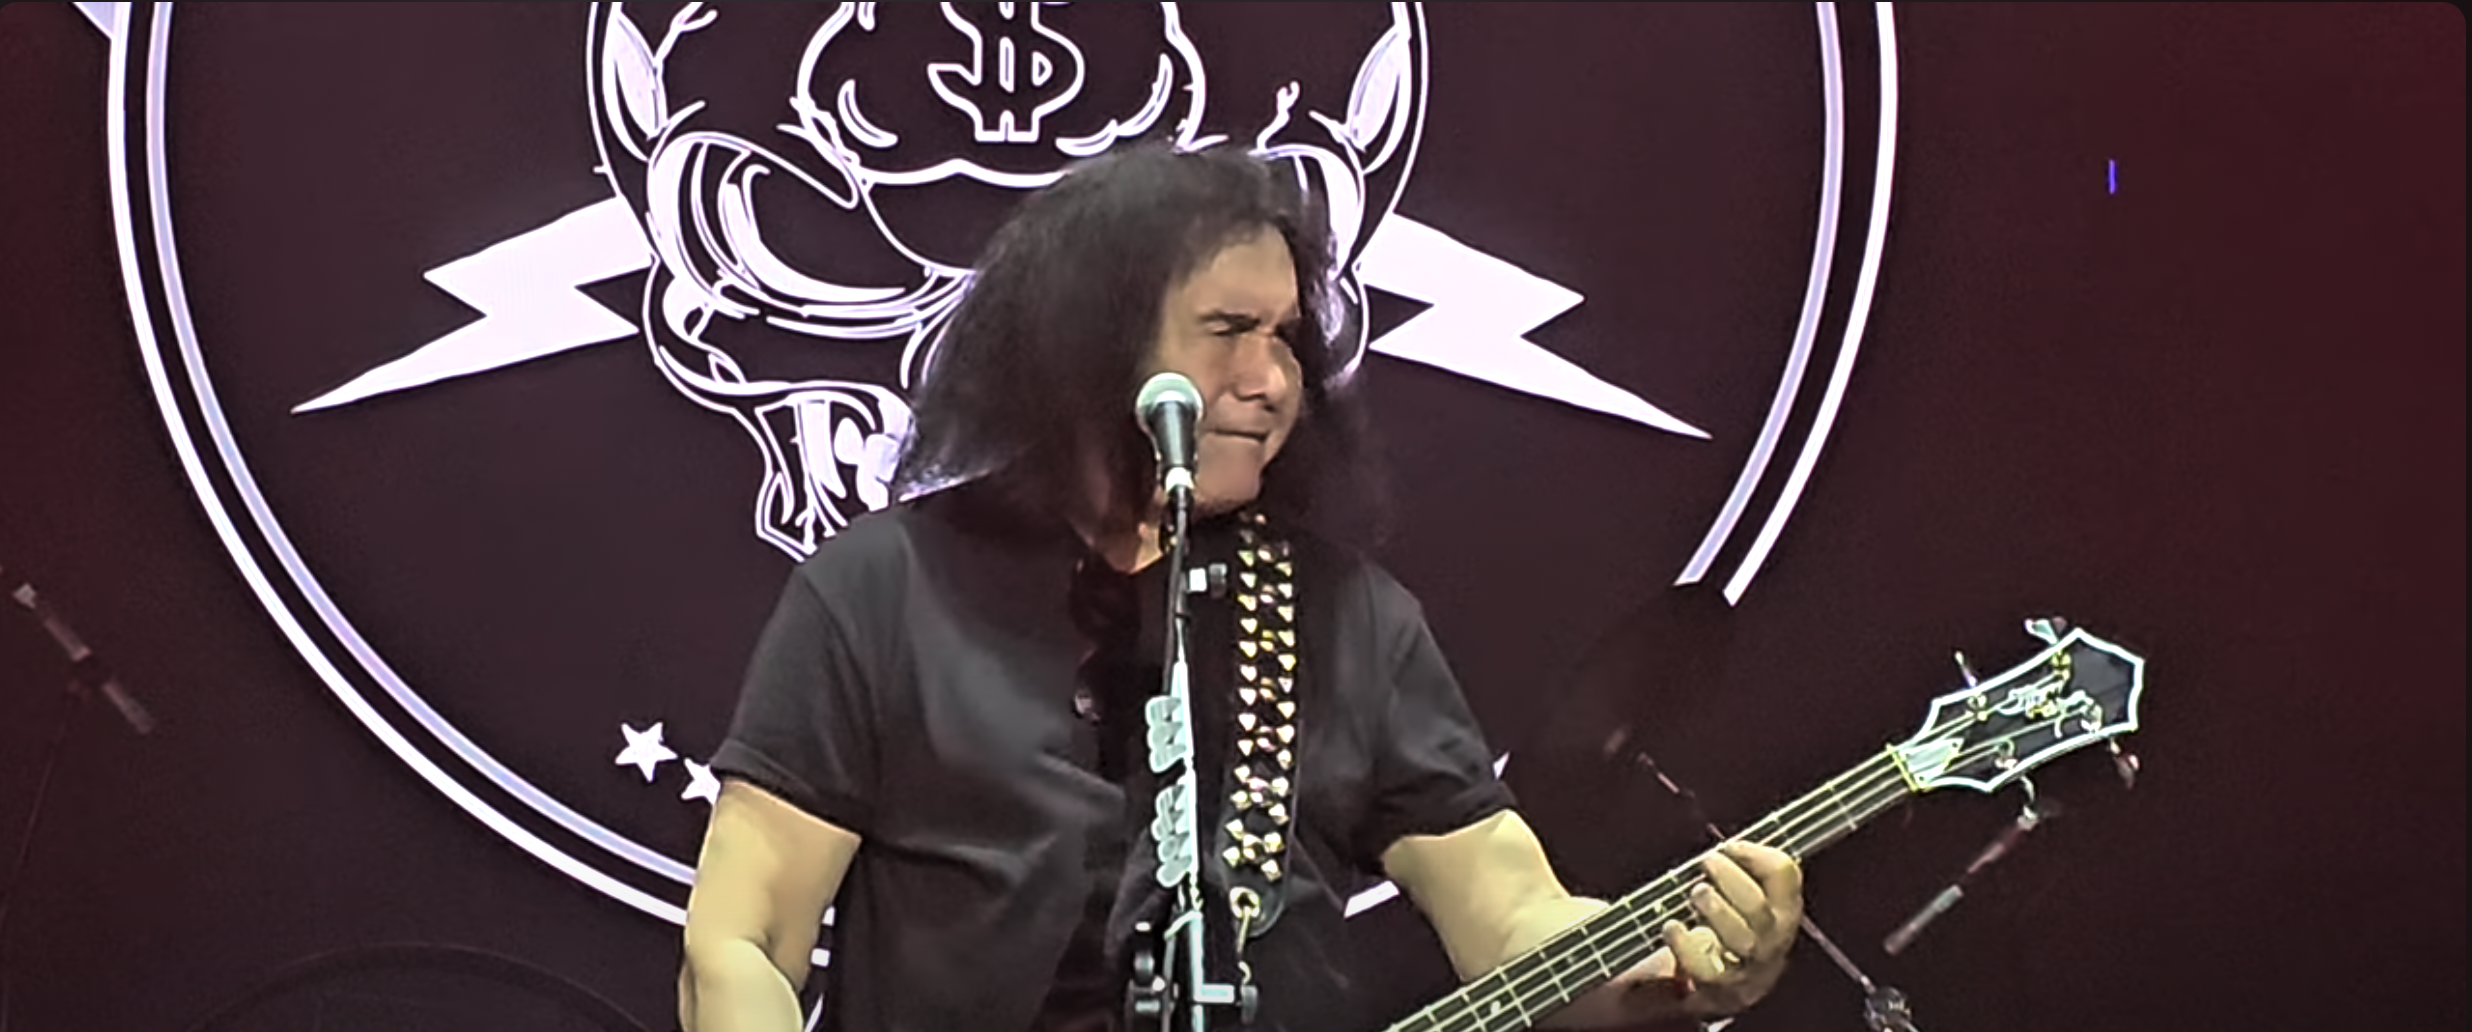 Gene Simmons plays second post-KISS solo show in Brazil